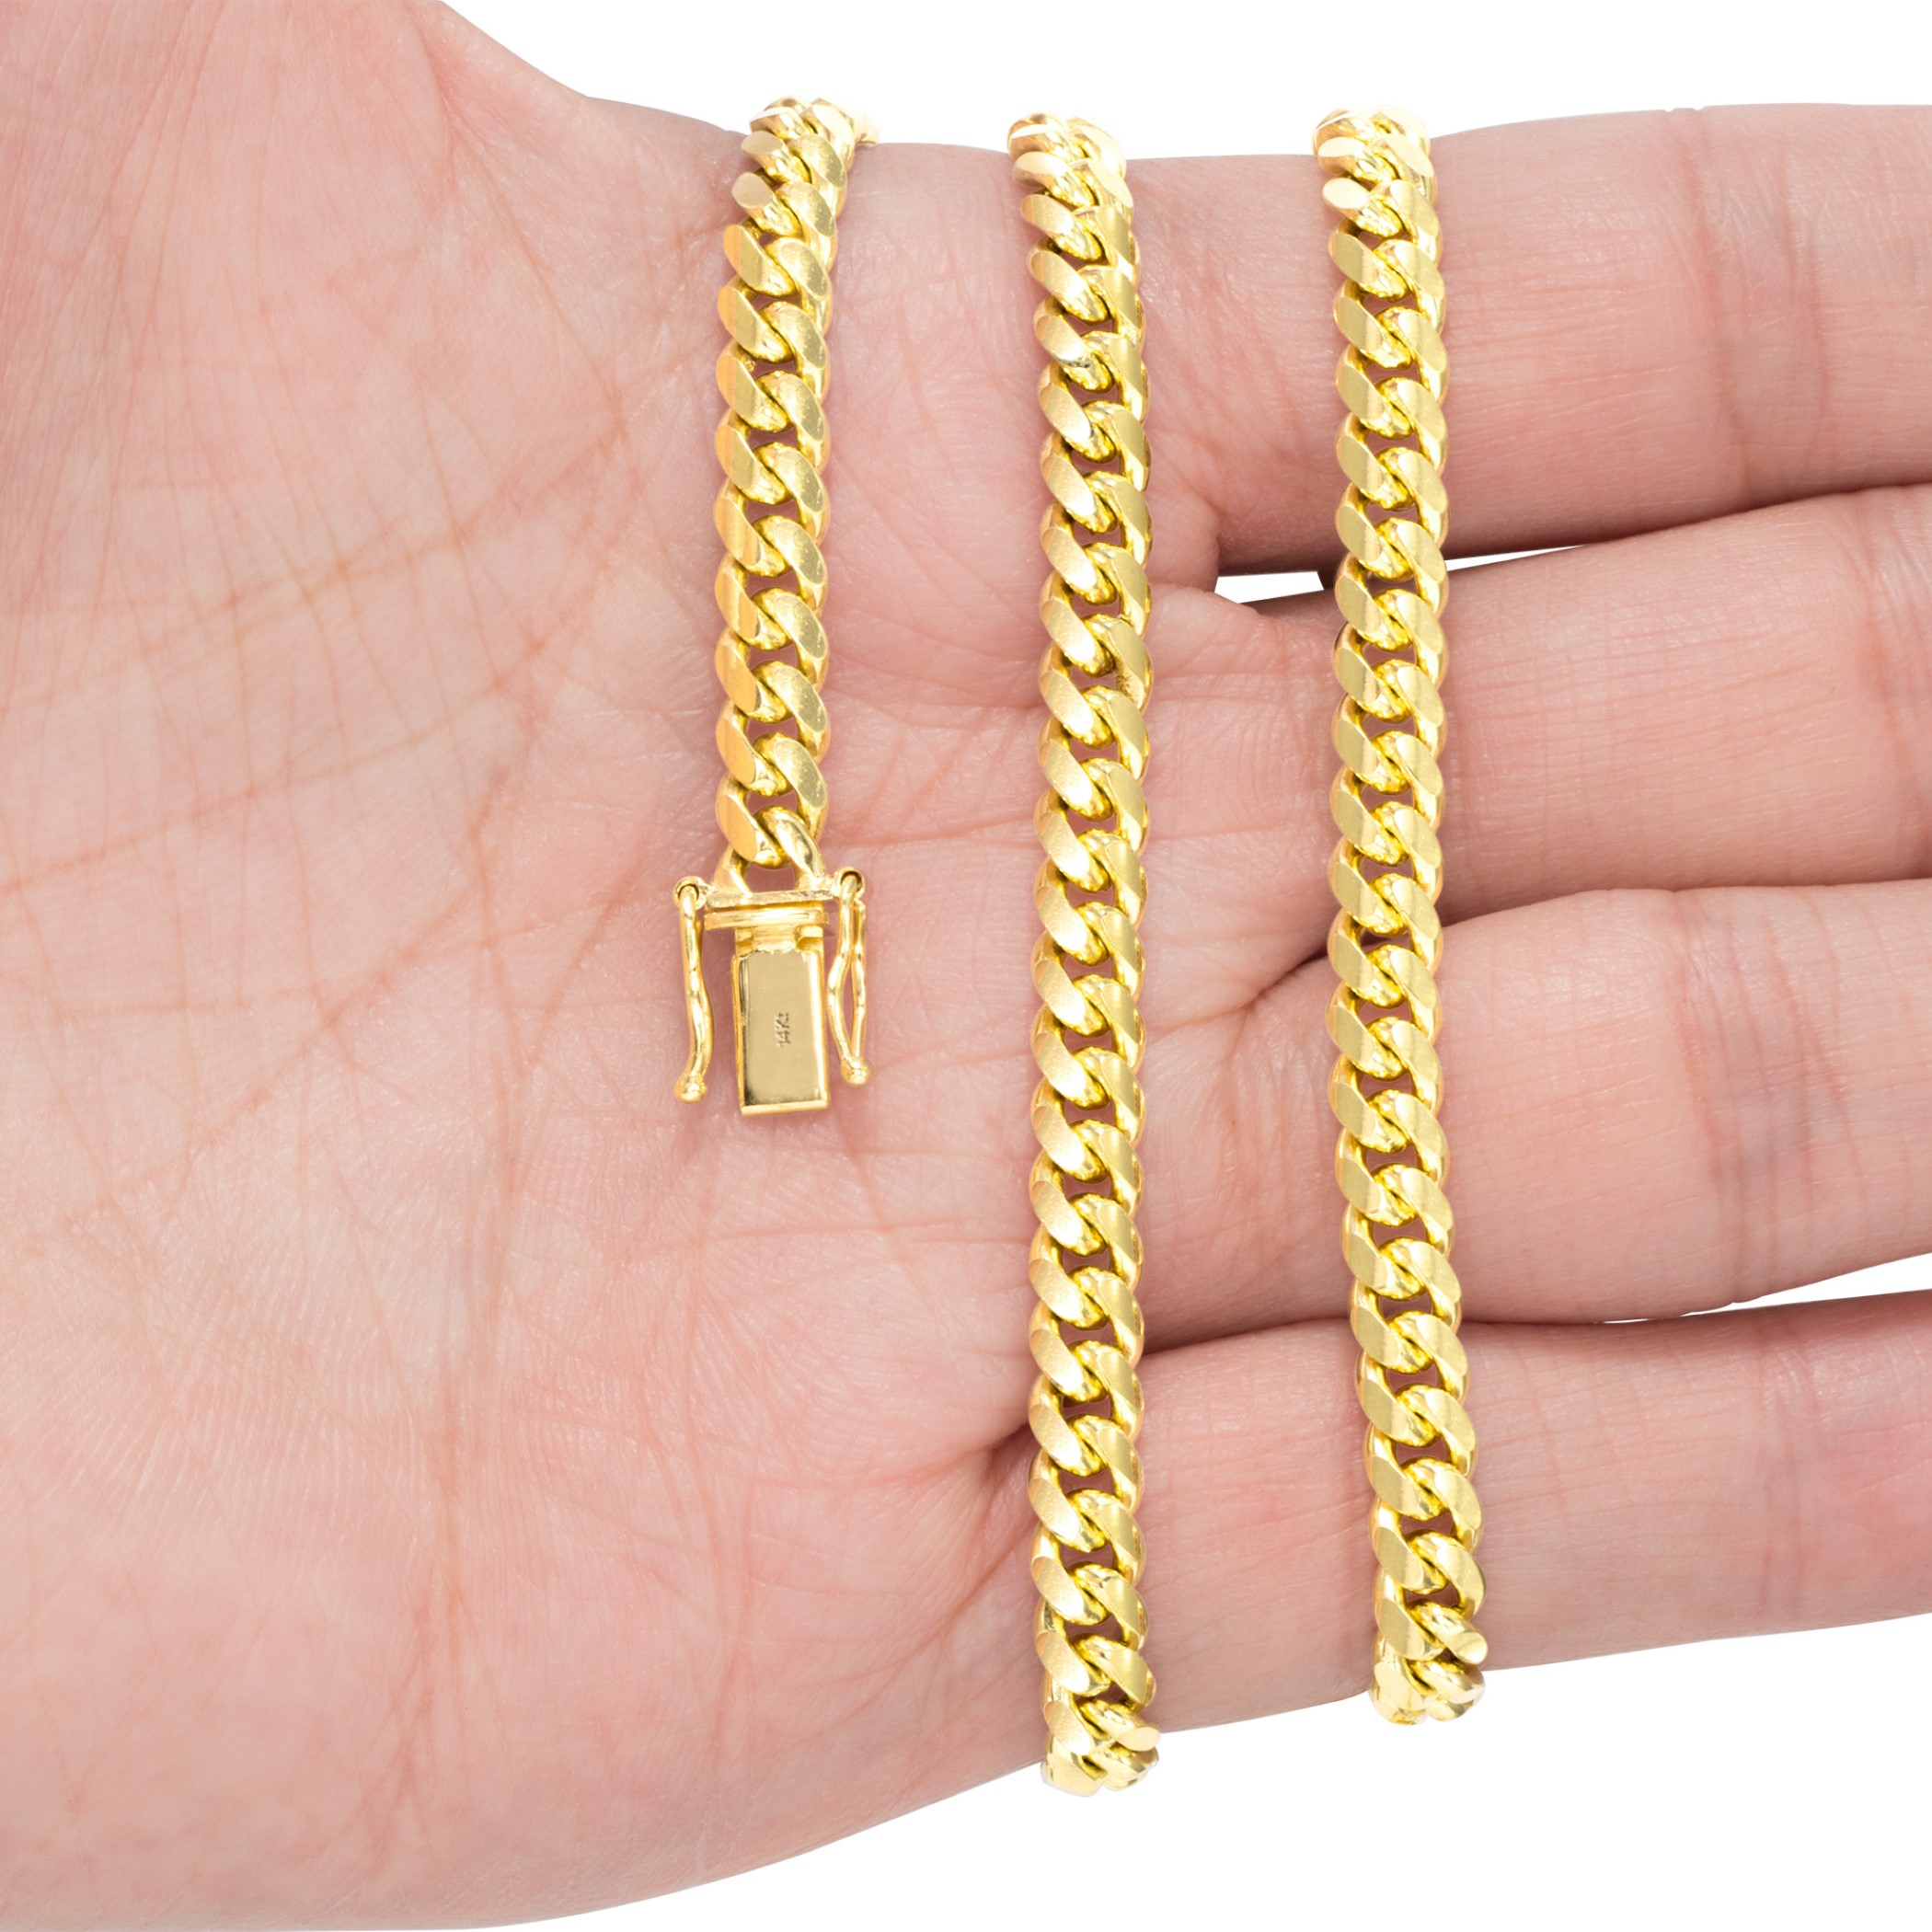 Nuragold 14k Yellow Gold 5mm Solid Miami Cuban Link Chain Pendant Necklace, Mens Jewelry Box Clasp 16" - 30" - image 4 of 11